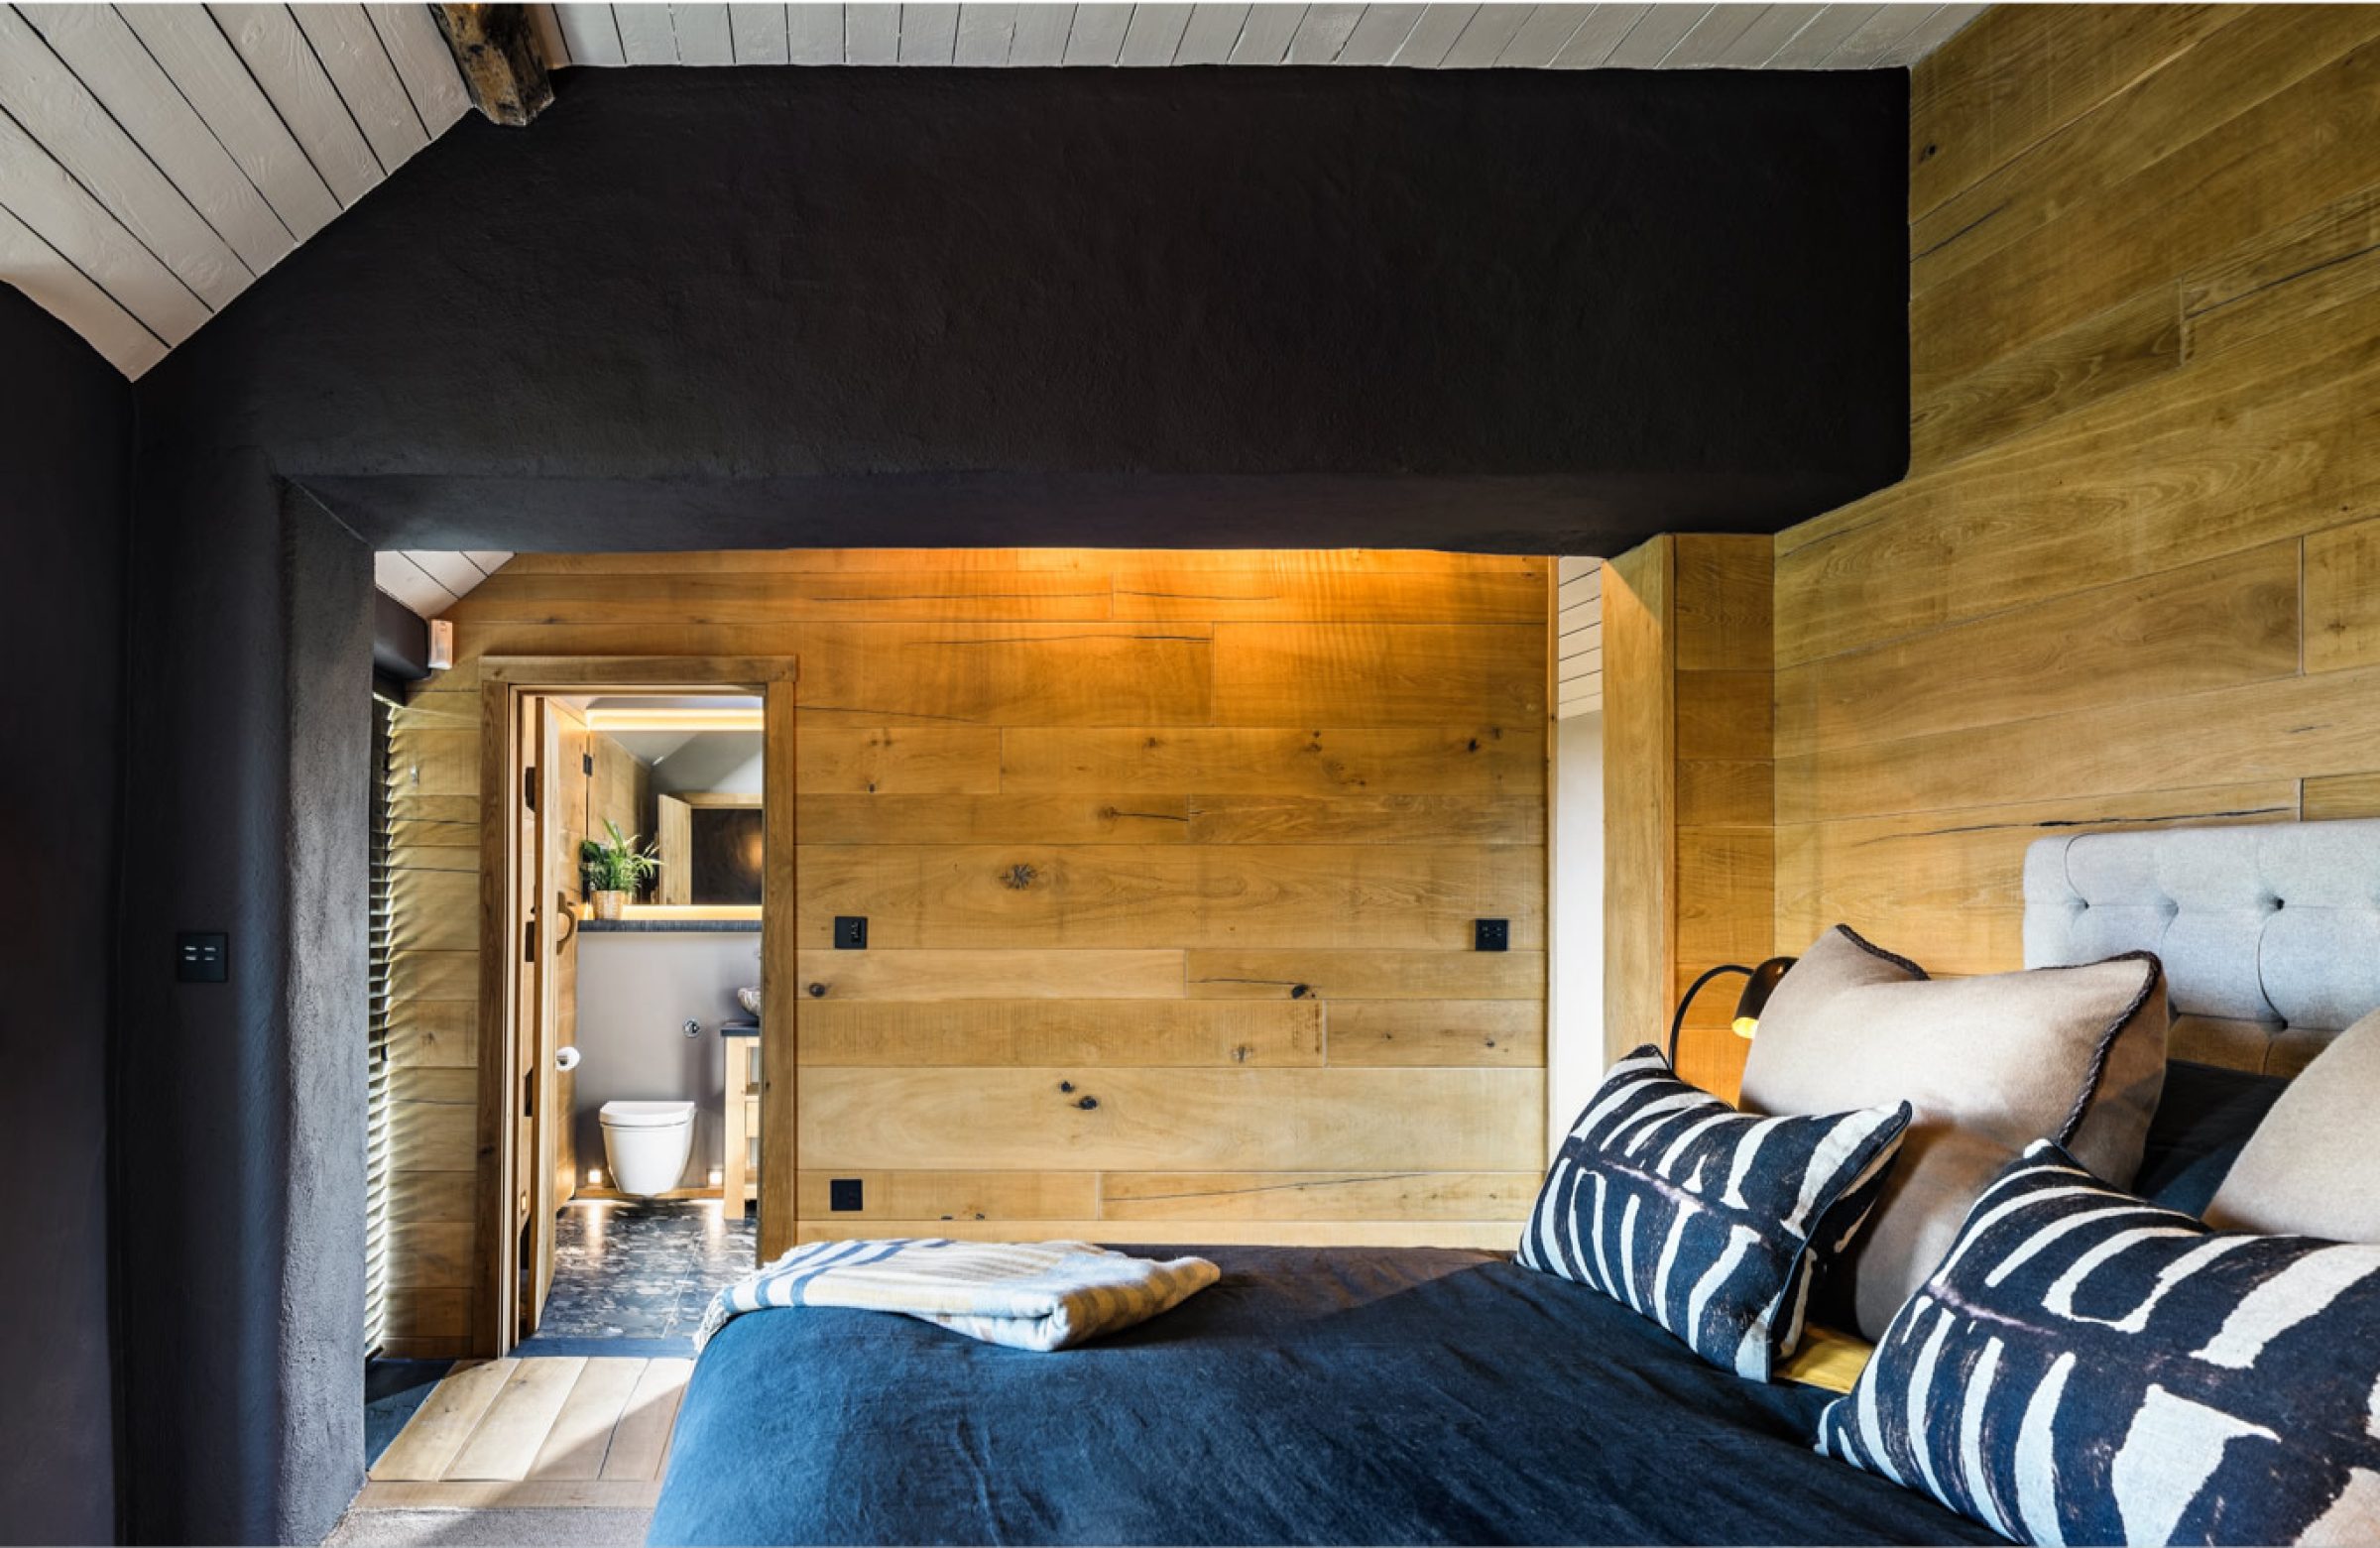 Bedroom Design with Wood Cladding